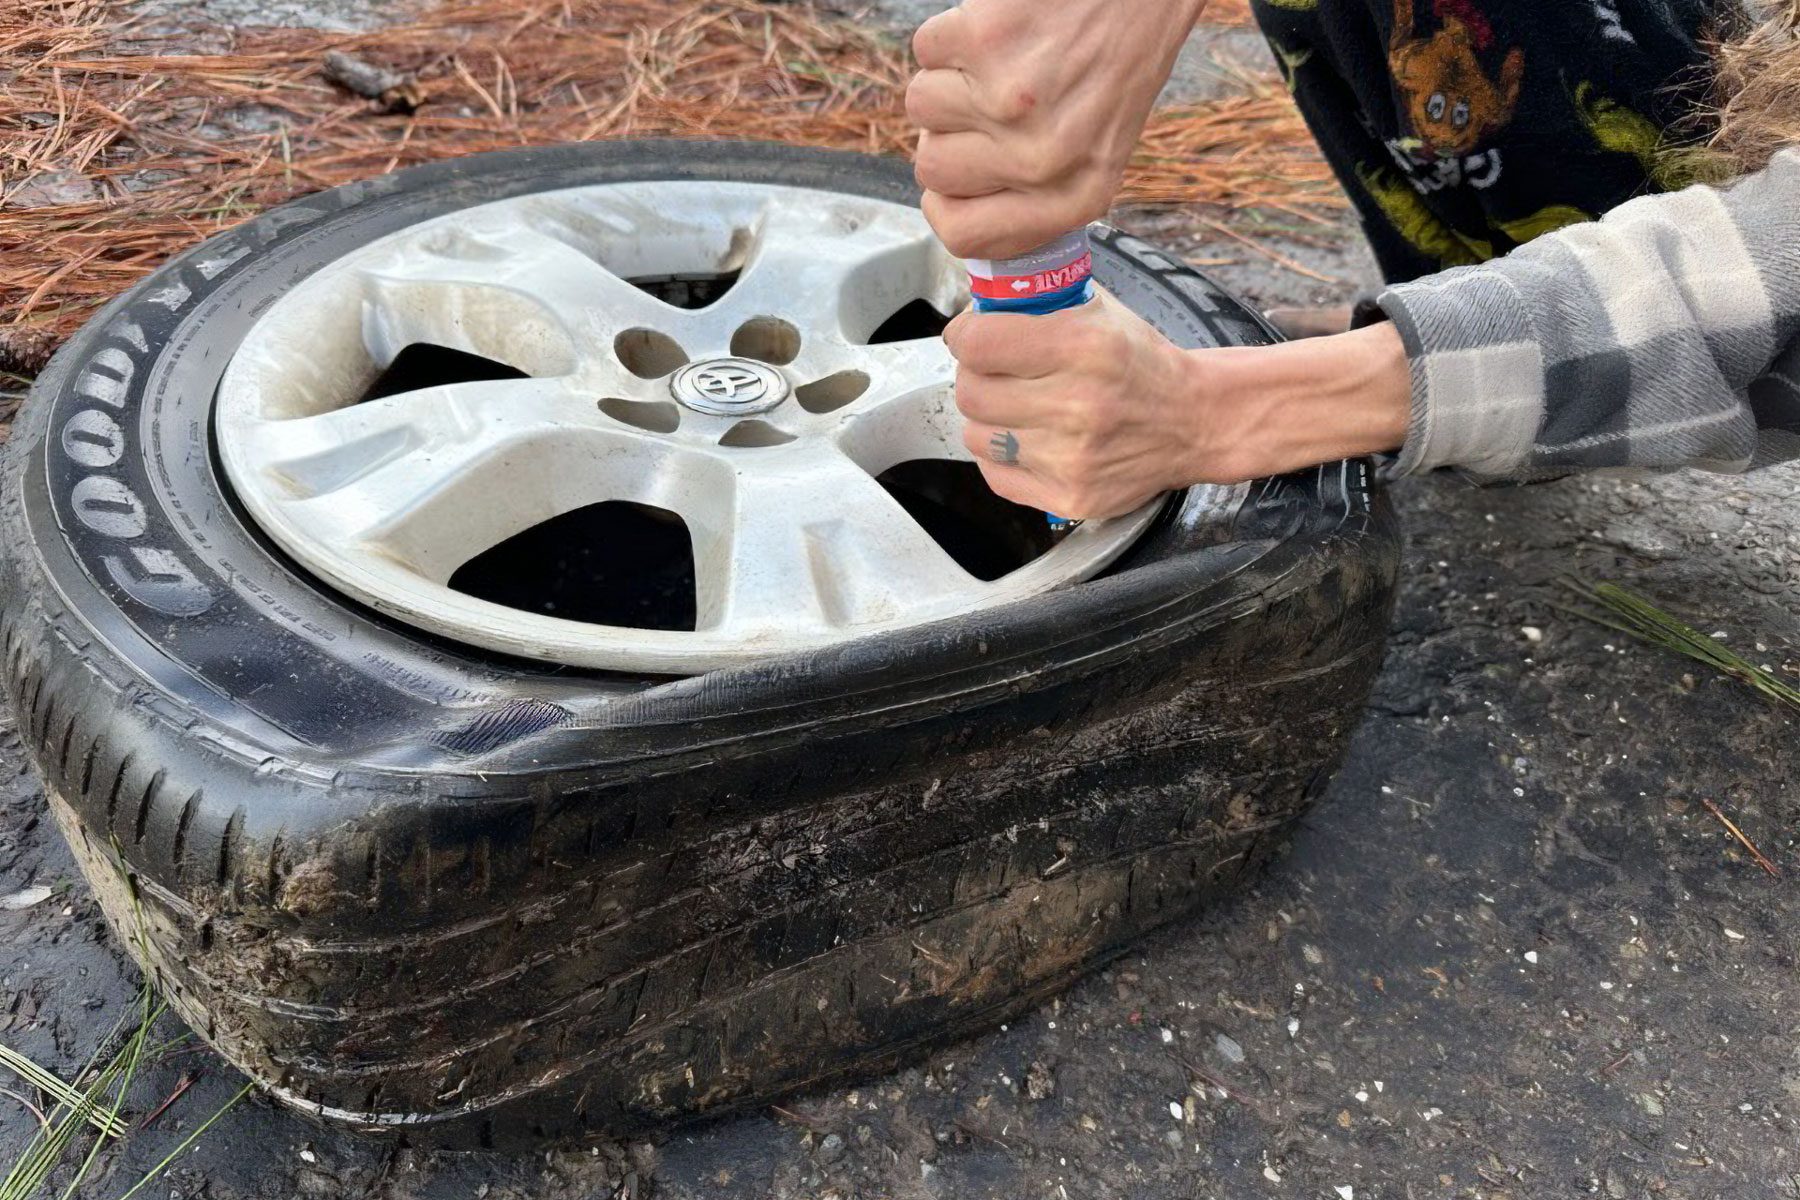 A person repairing a tyre outdoors